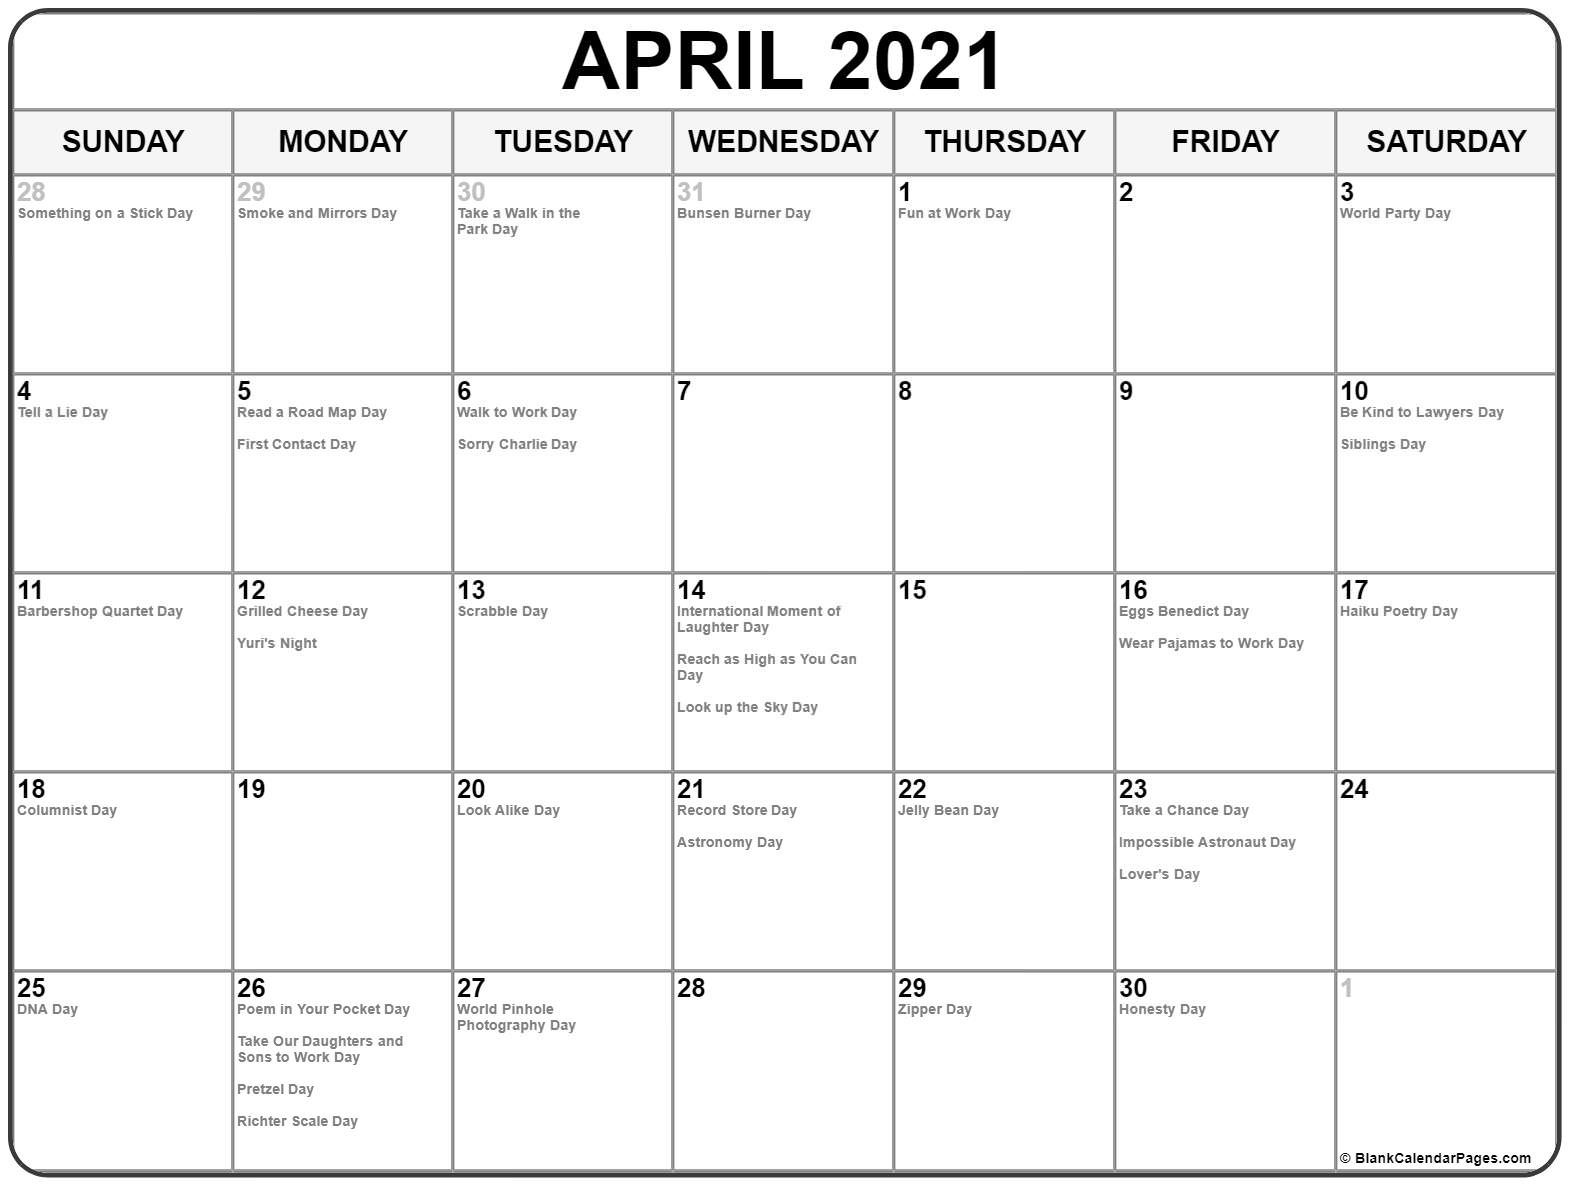 collection of april 2021 calendars with holidays